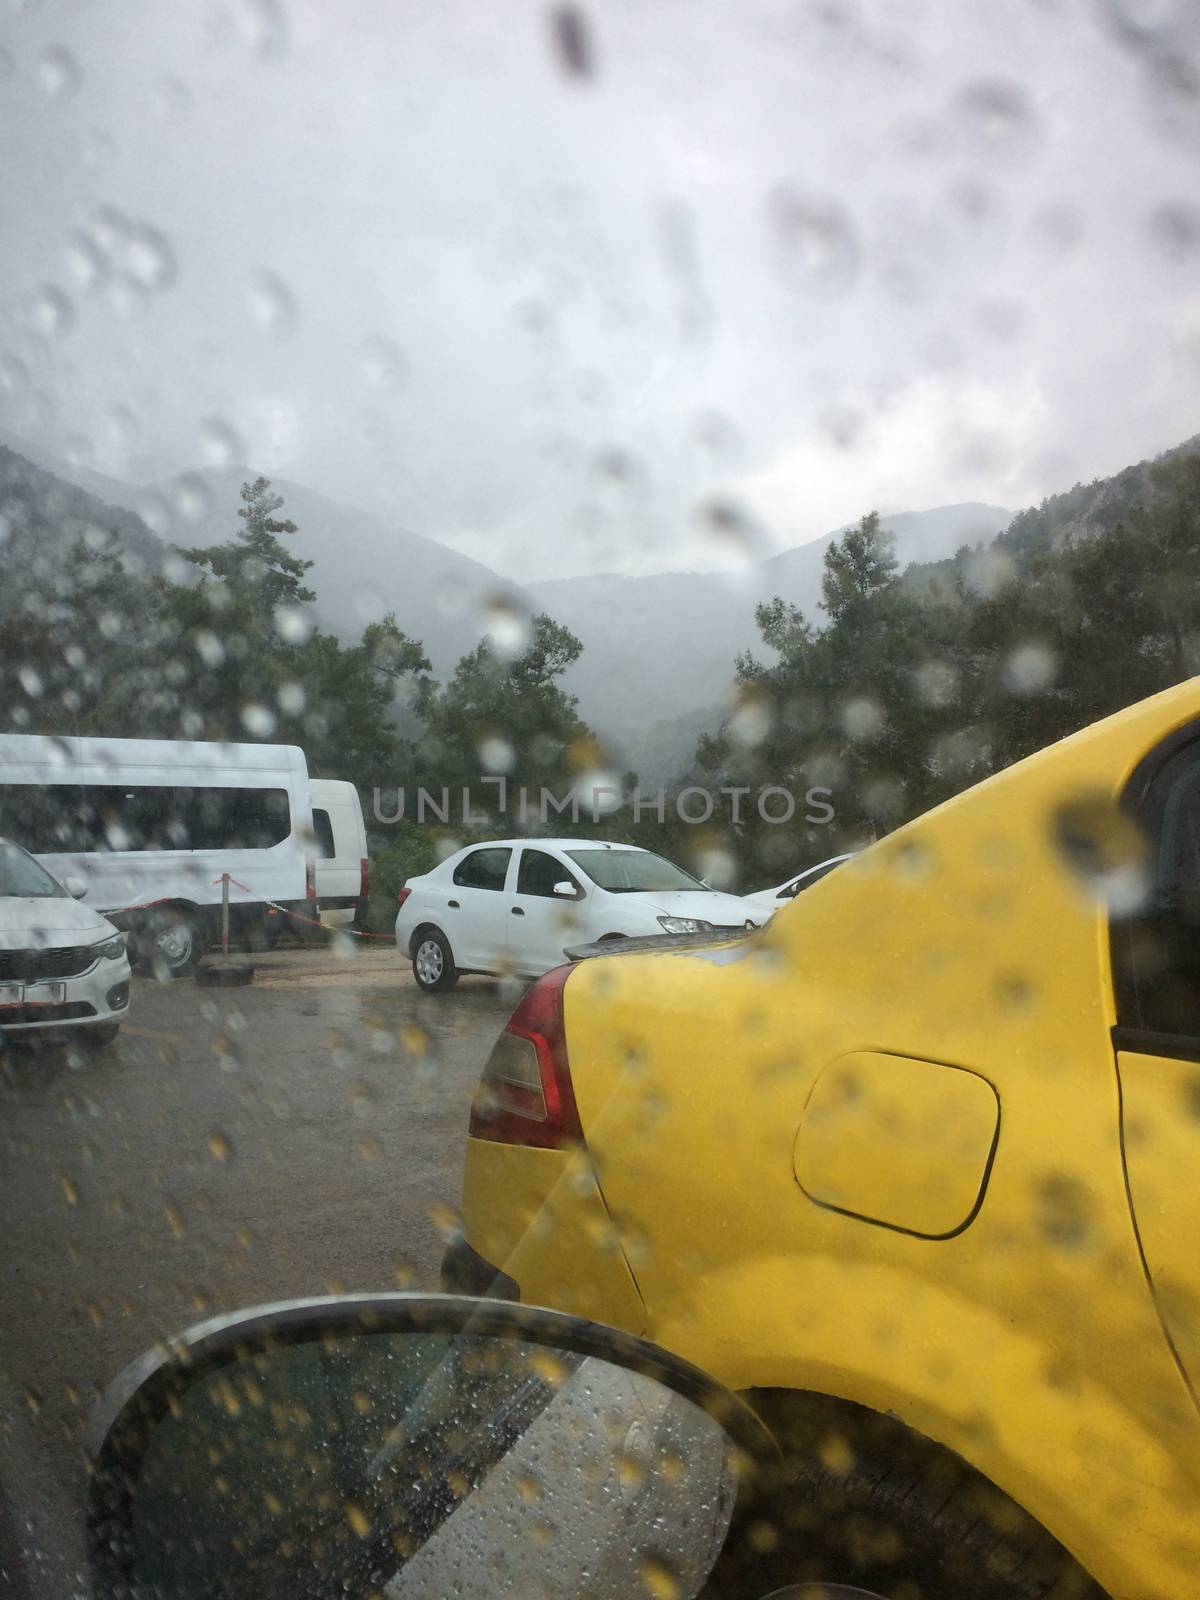 The road with the cars is photographed through the rain splattered windshield of the car.